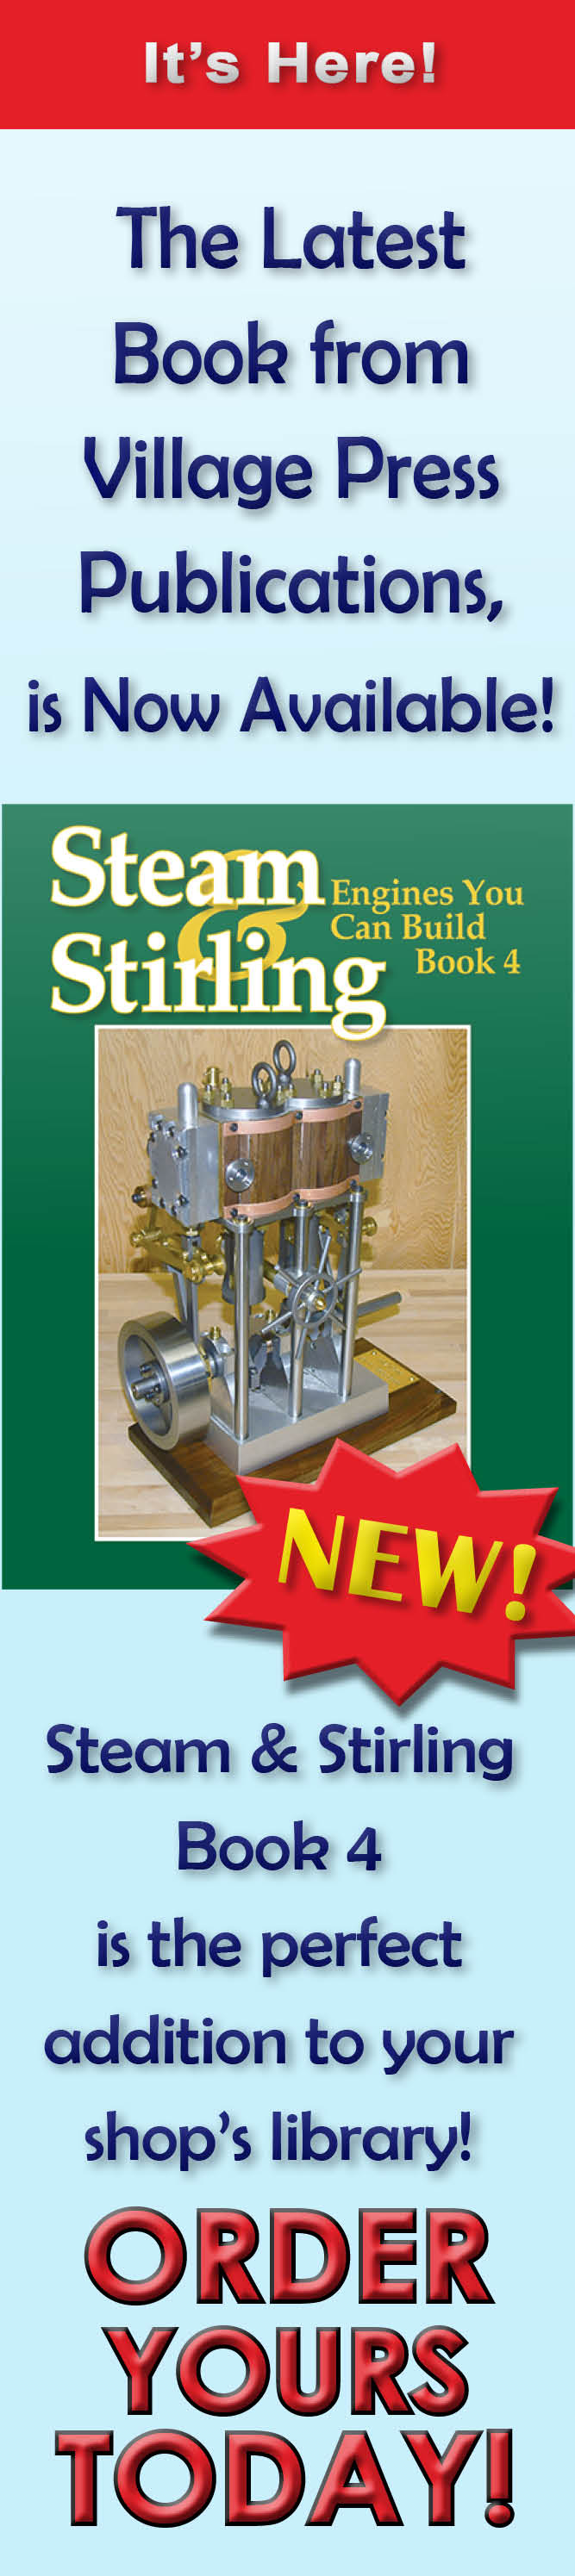 Steam & Stirling Book 4 - Engines You Can Build!